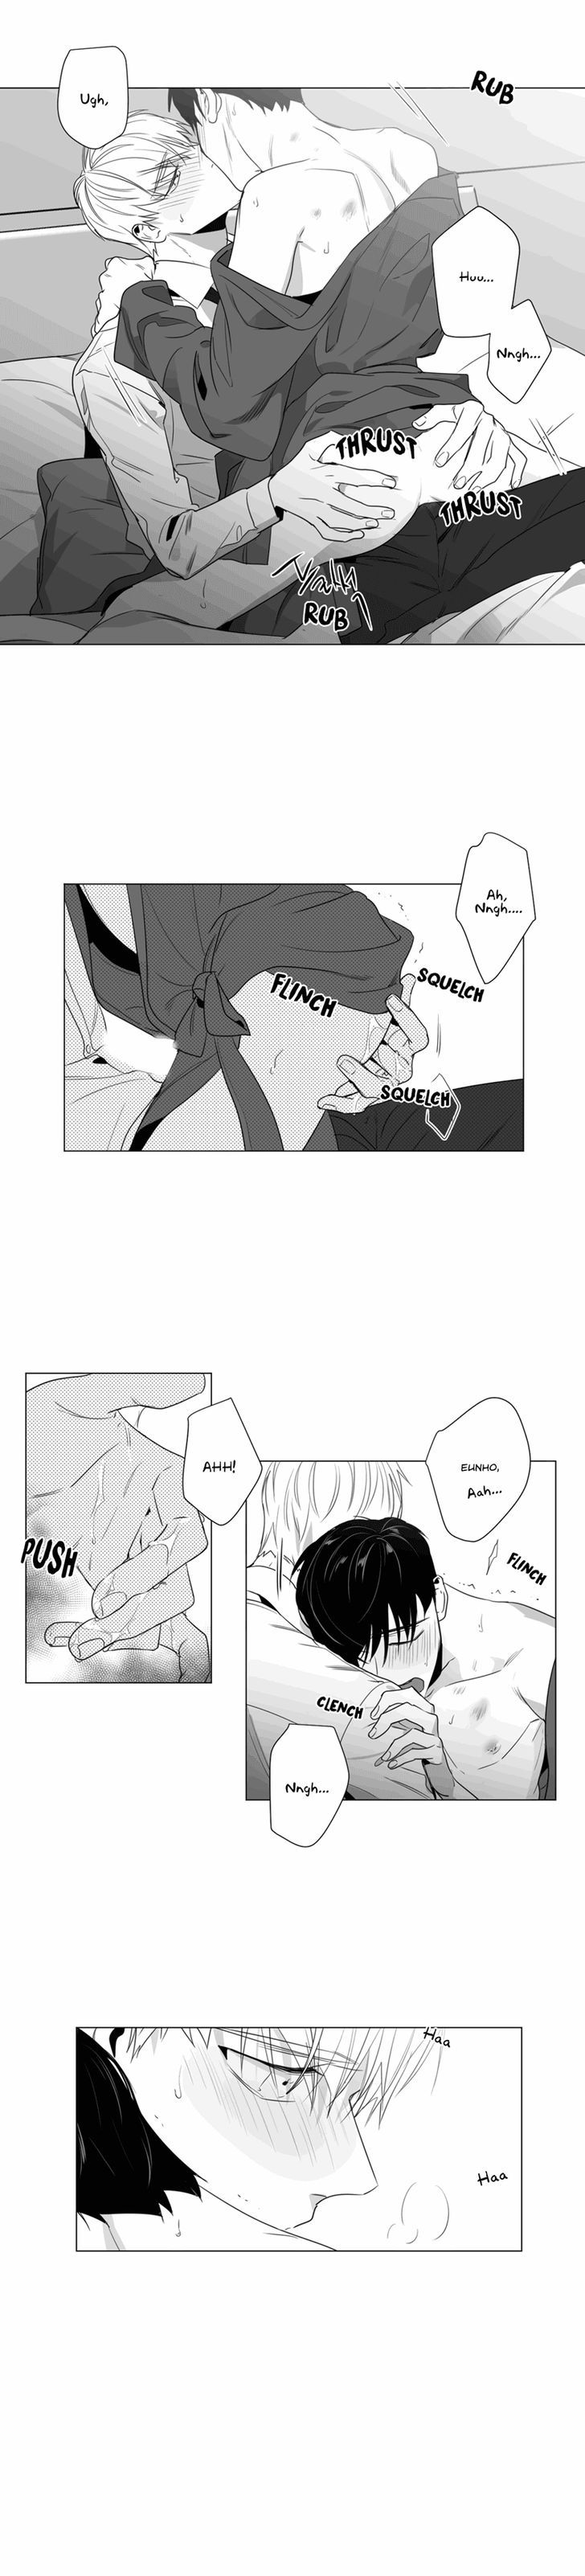 Lover Boy (Lezhin) Chapter 034 page 5